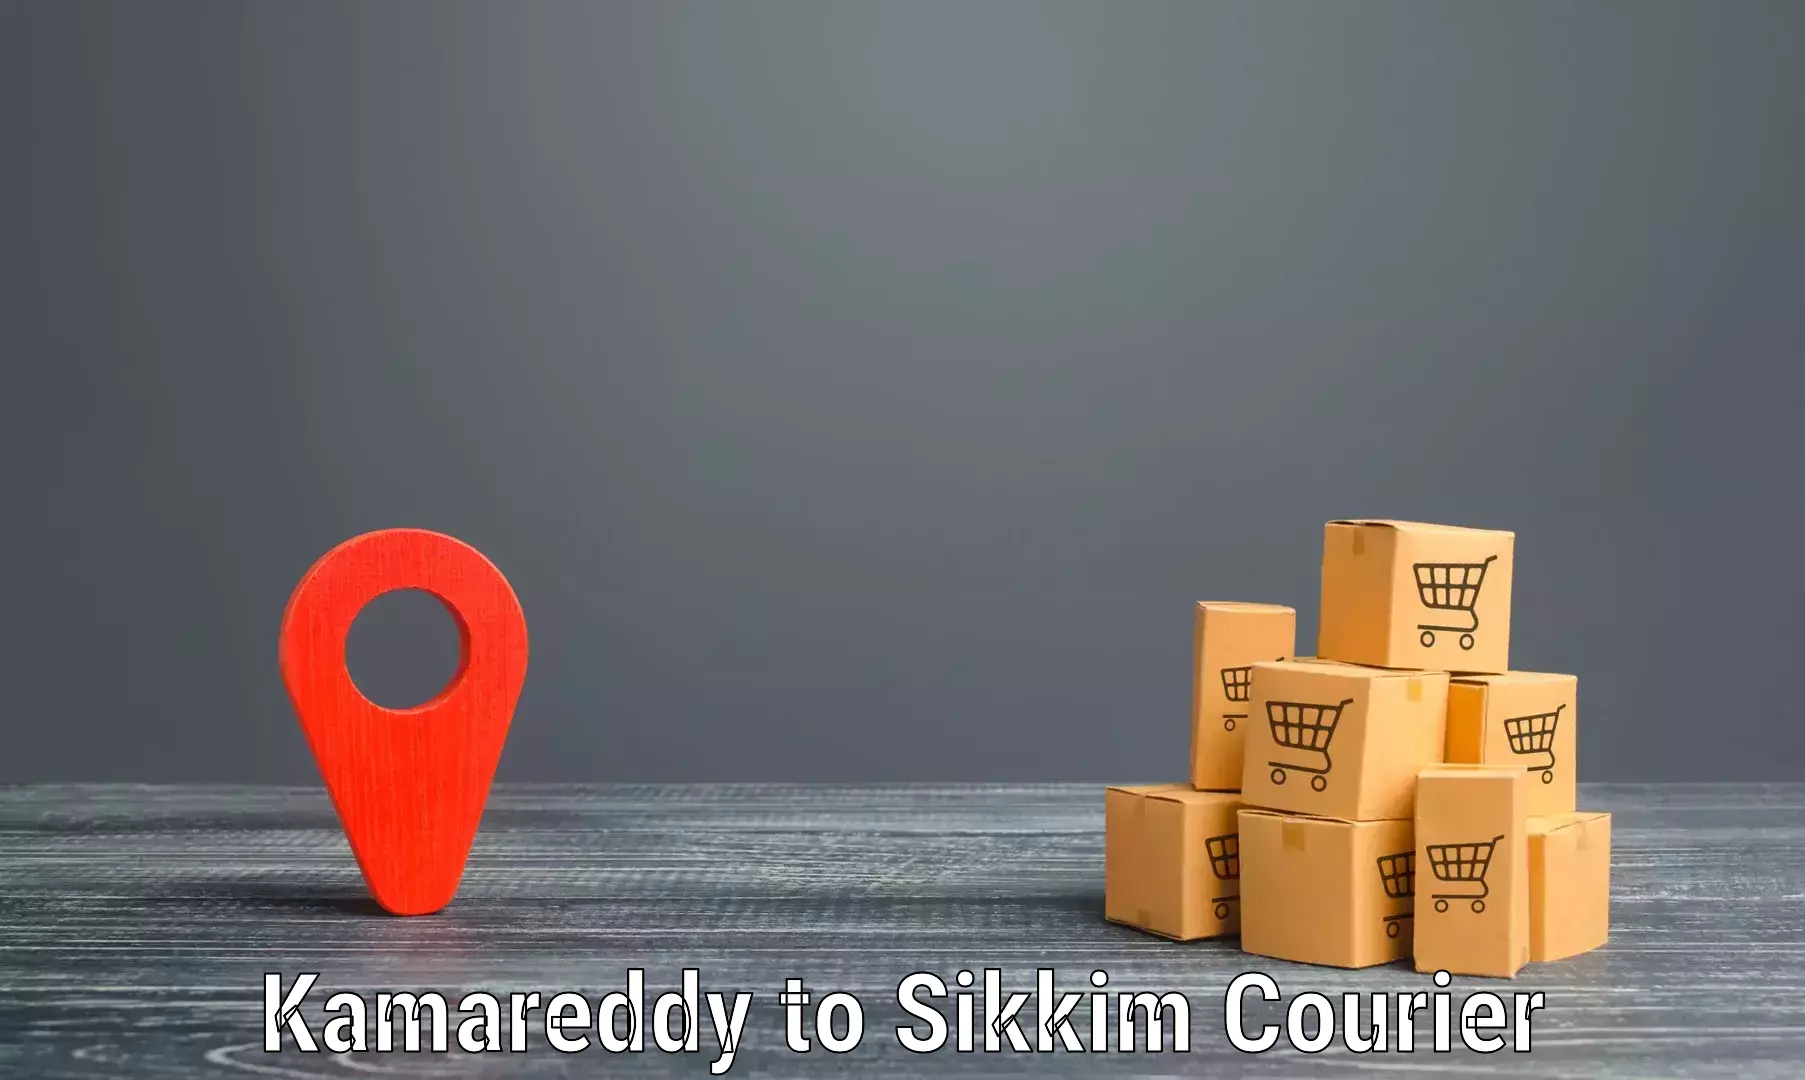 Reliable logistics providers Kamareddy to Pelling